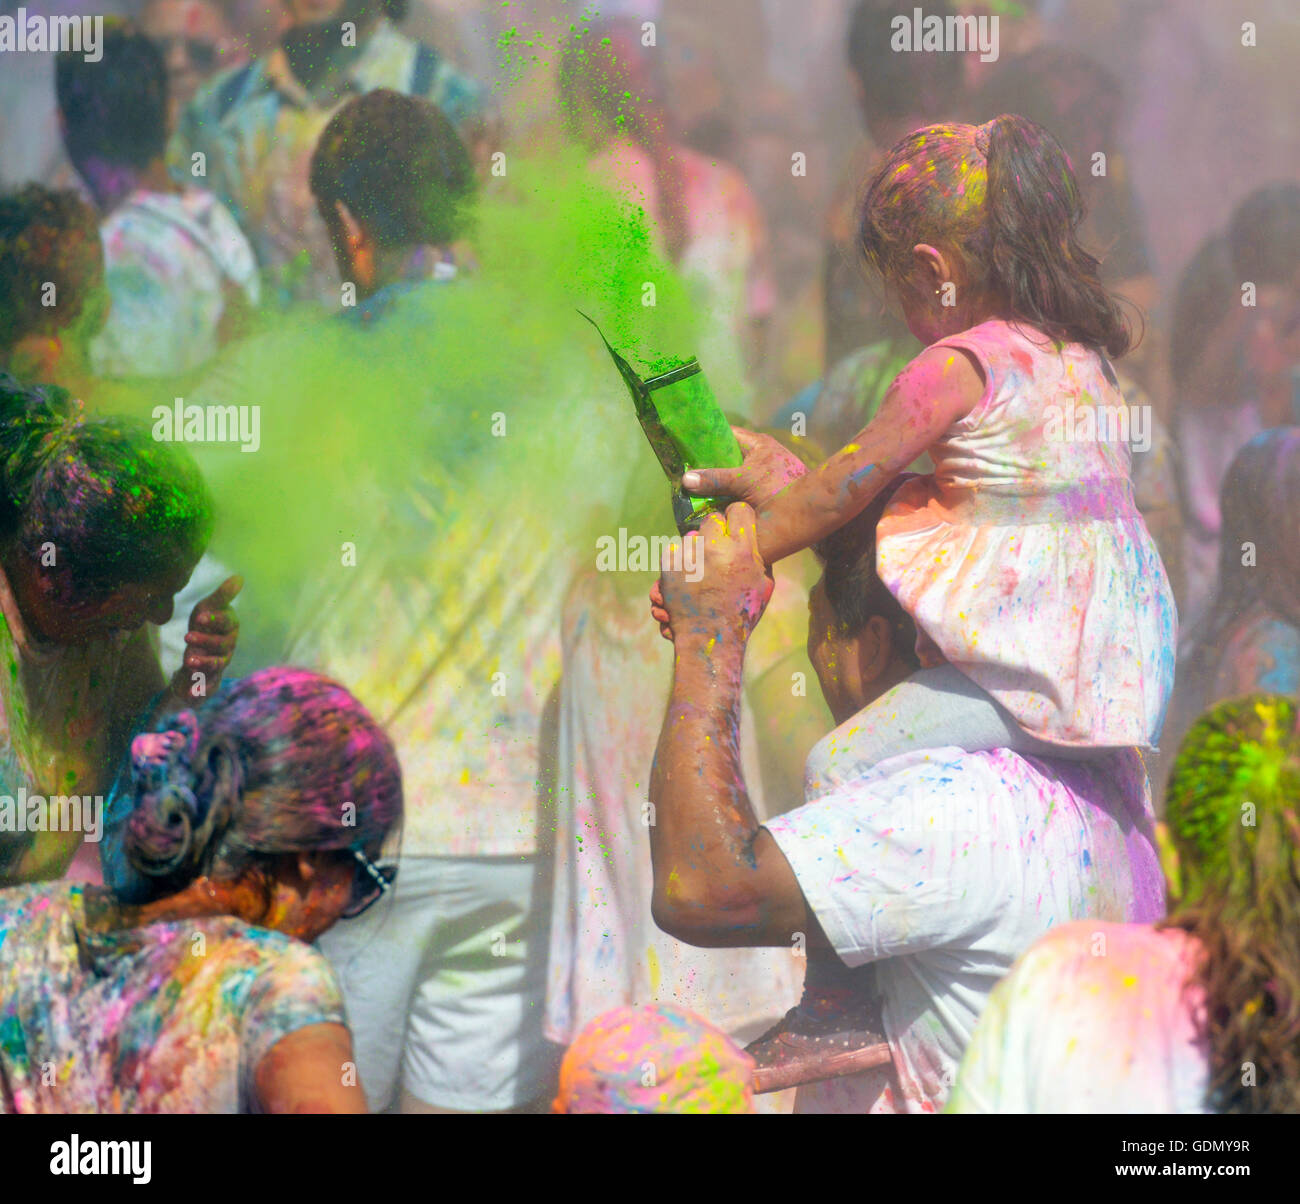 People celebrating during the color throw at the Holi Festival of Colors in Barcelona, Spain. Stock Photo